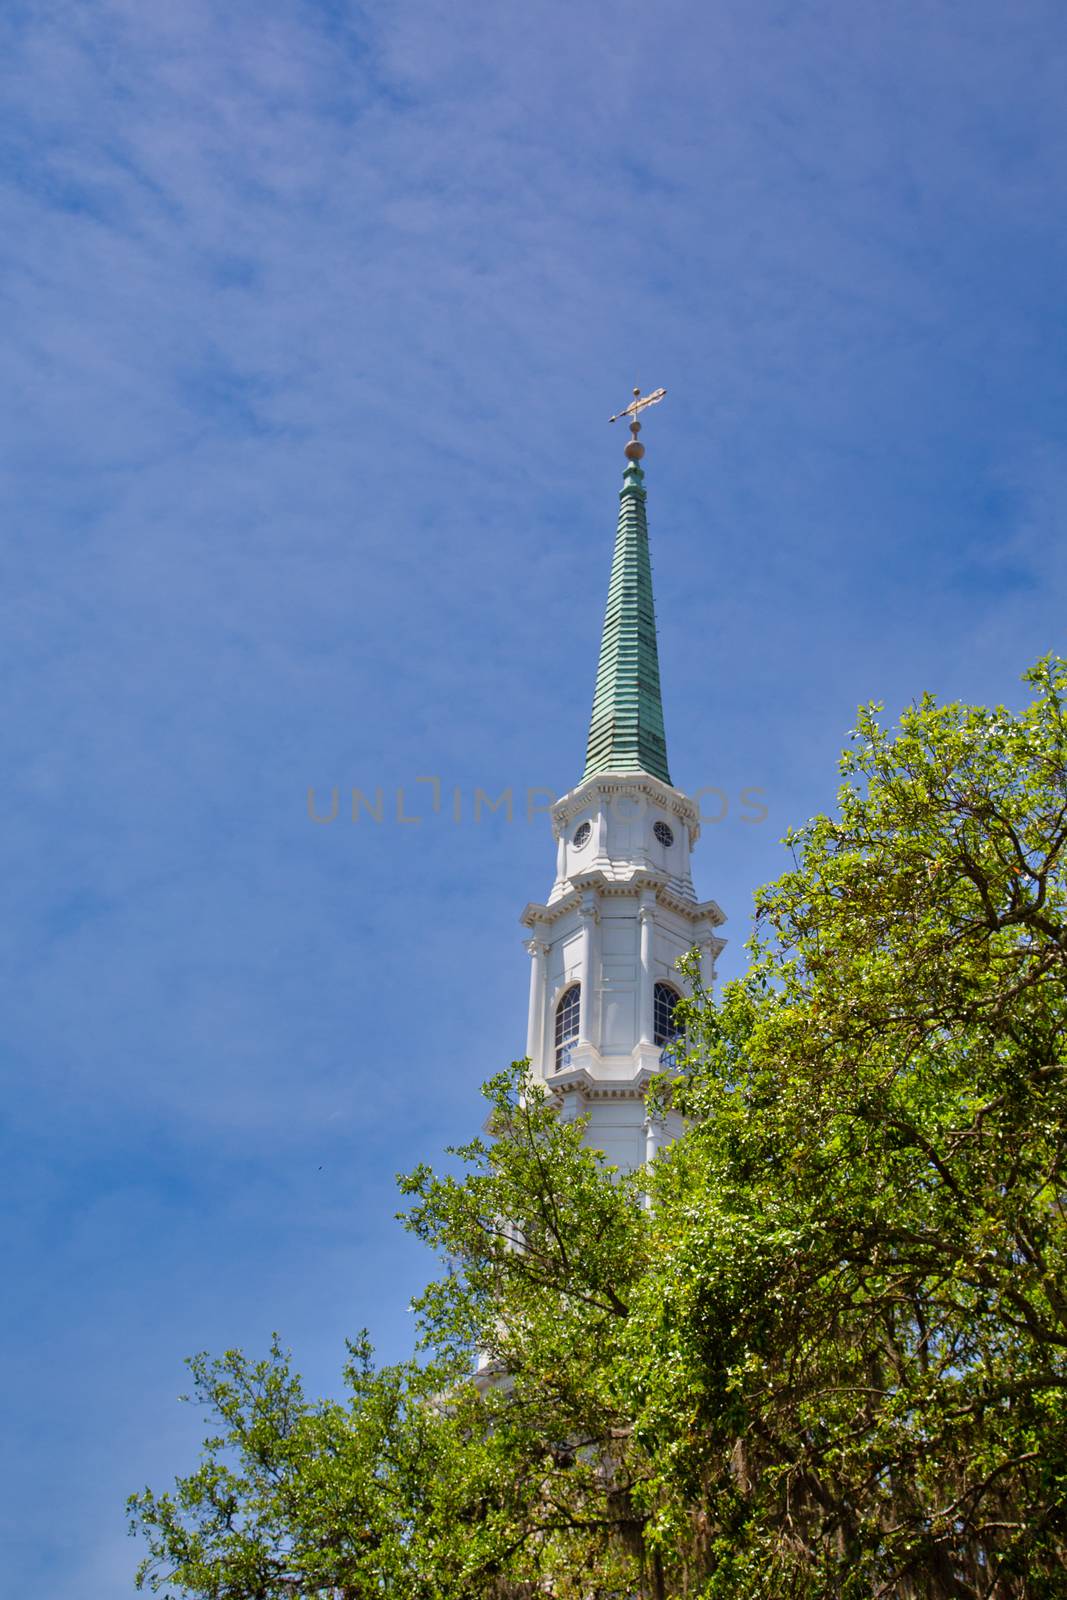 A church steeple rising into the sky beyond trees